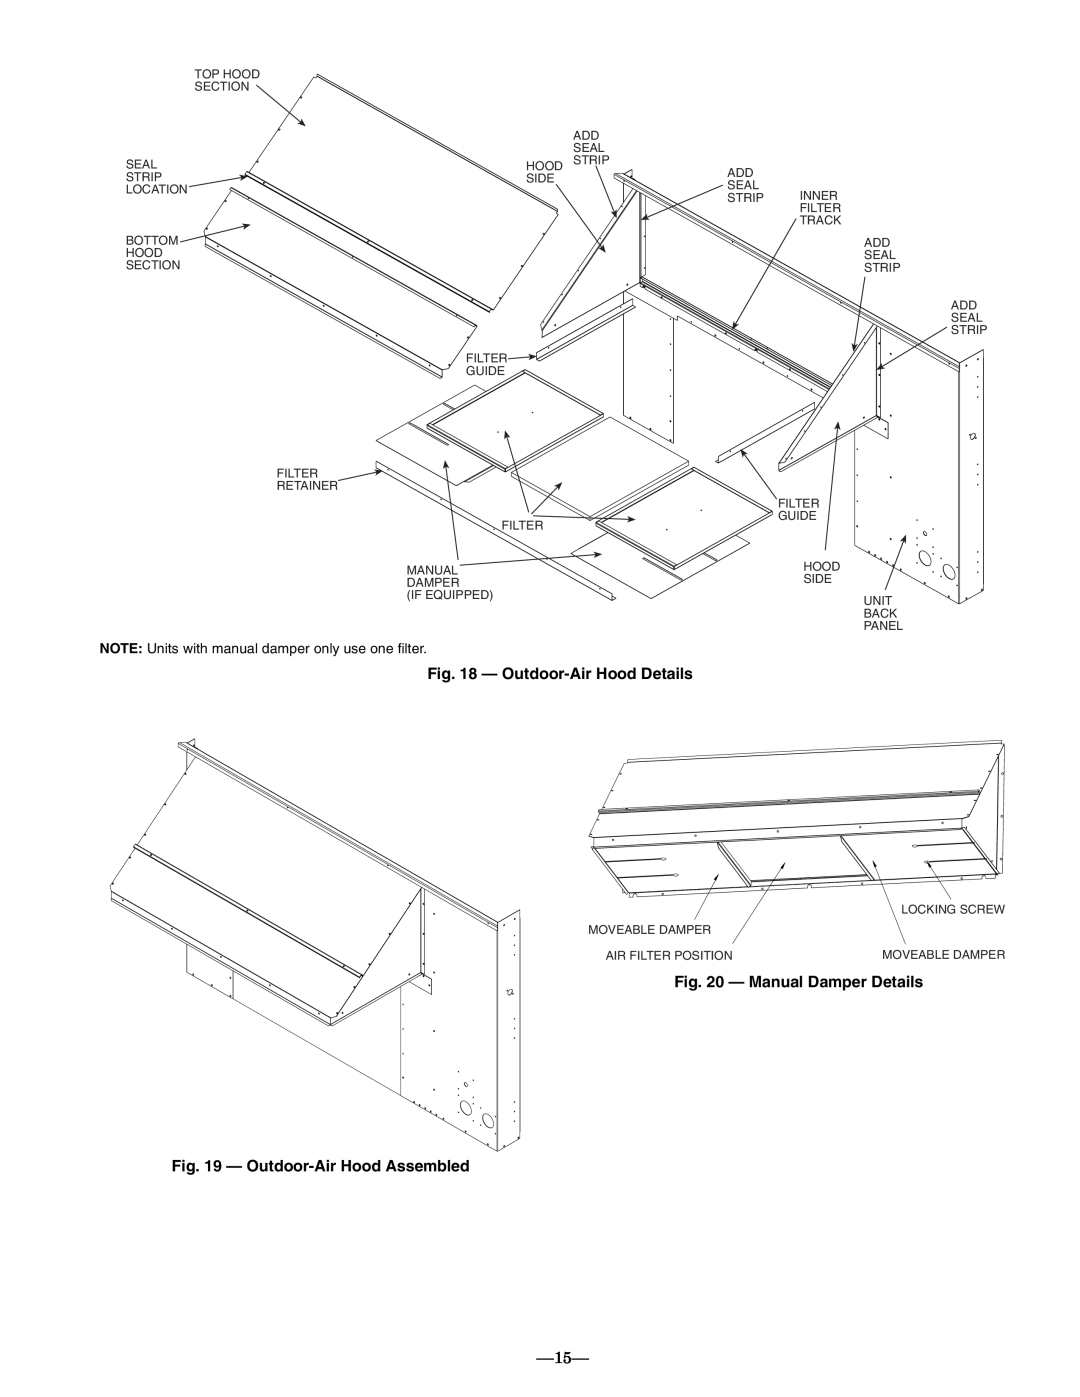 Bryant 581A operation manual Outdoor-AirHood Details, Manual Damper Details, Outdoor-AirHood Assembled 